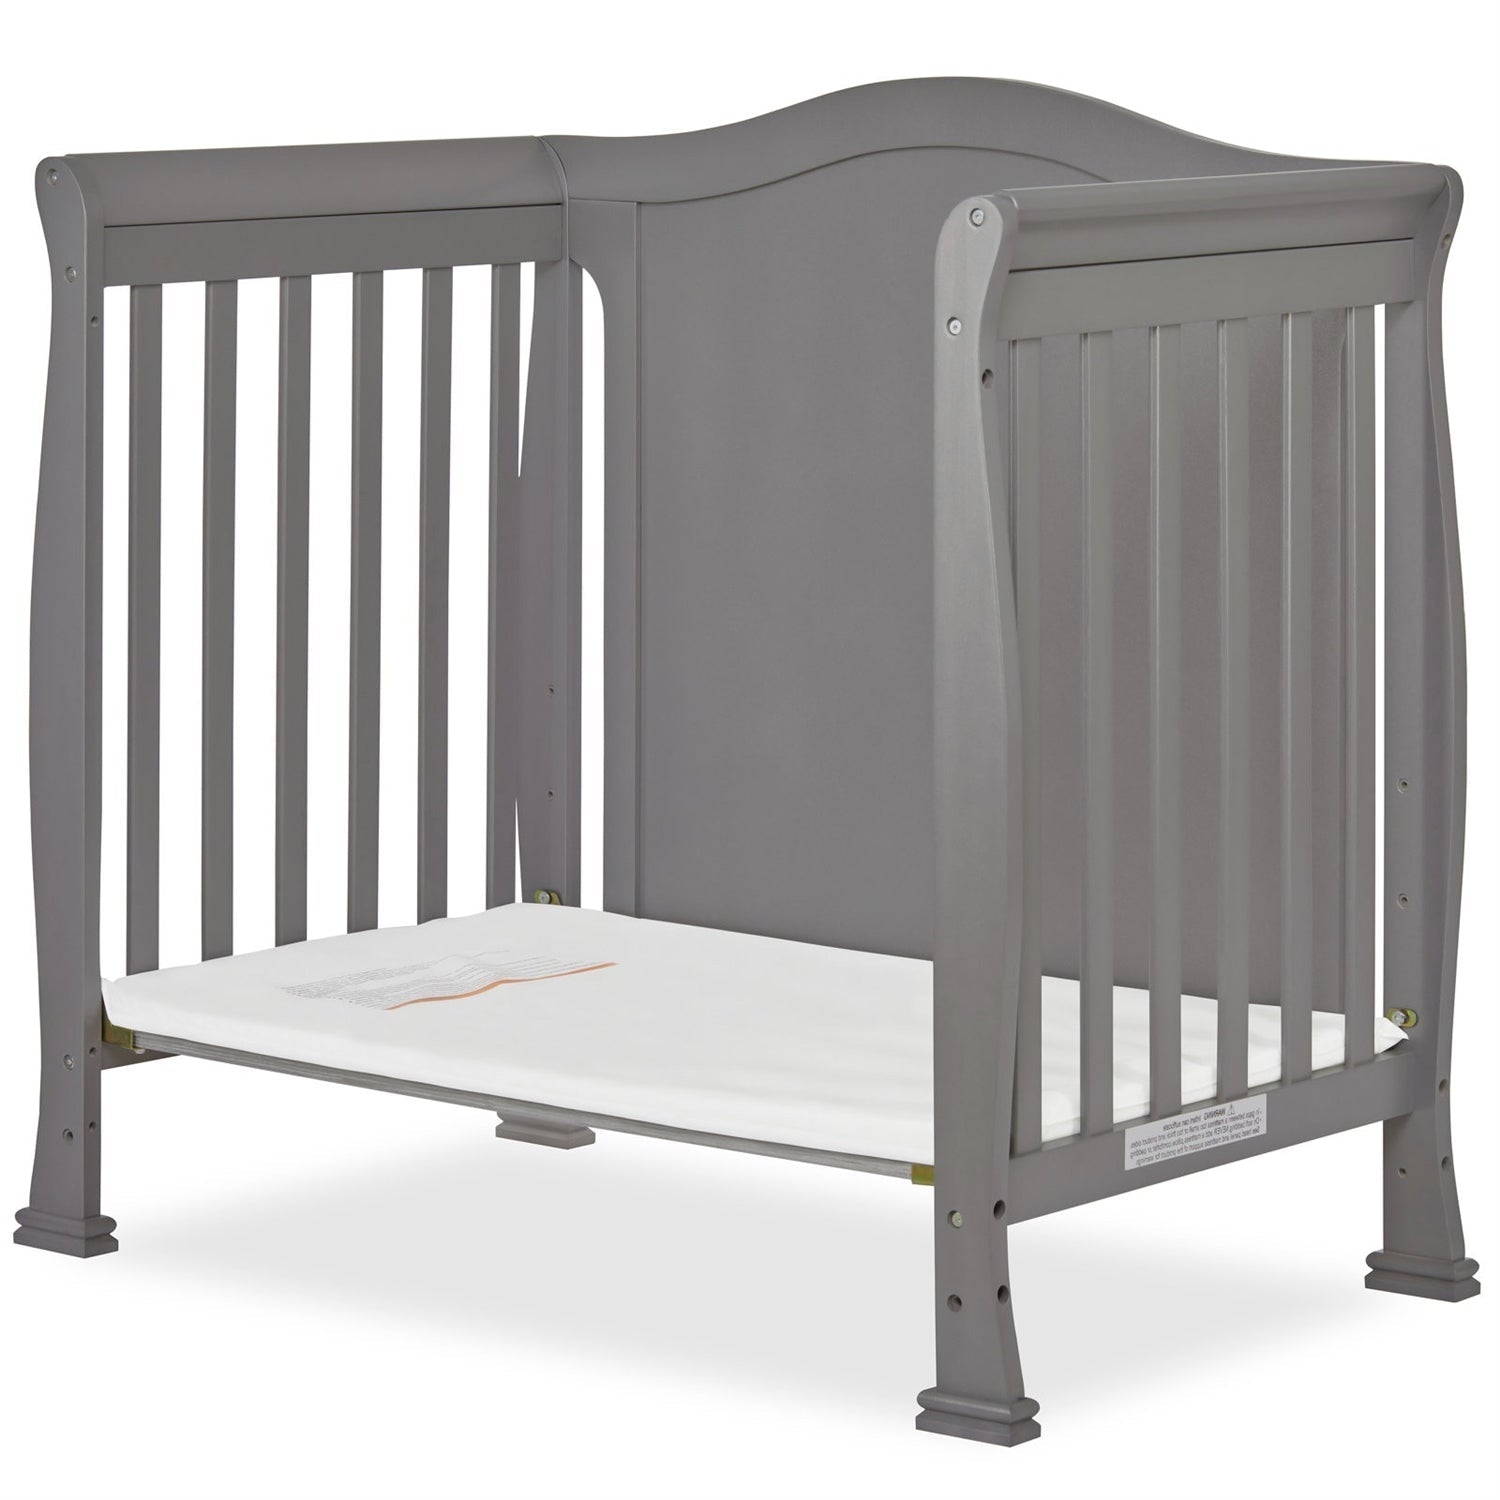 Bedroom > Baby & Kids - Solid Pine Wood 3-in-1 Convertible Baby Crib Daybed Toddler Bed In Grey Finish